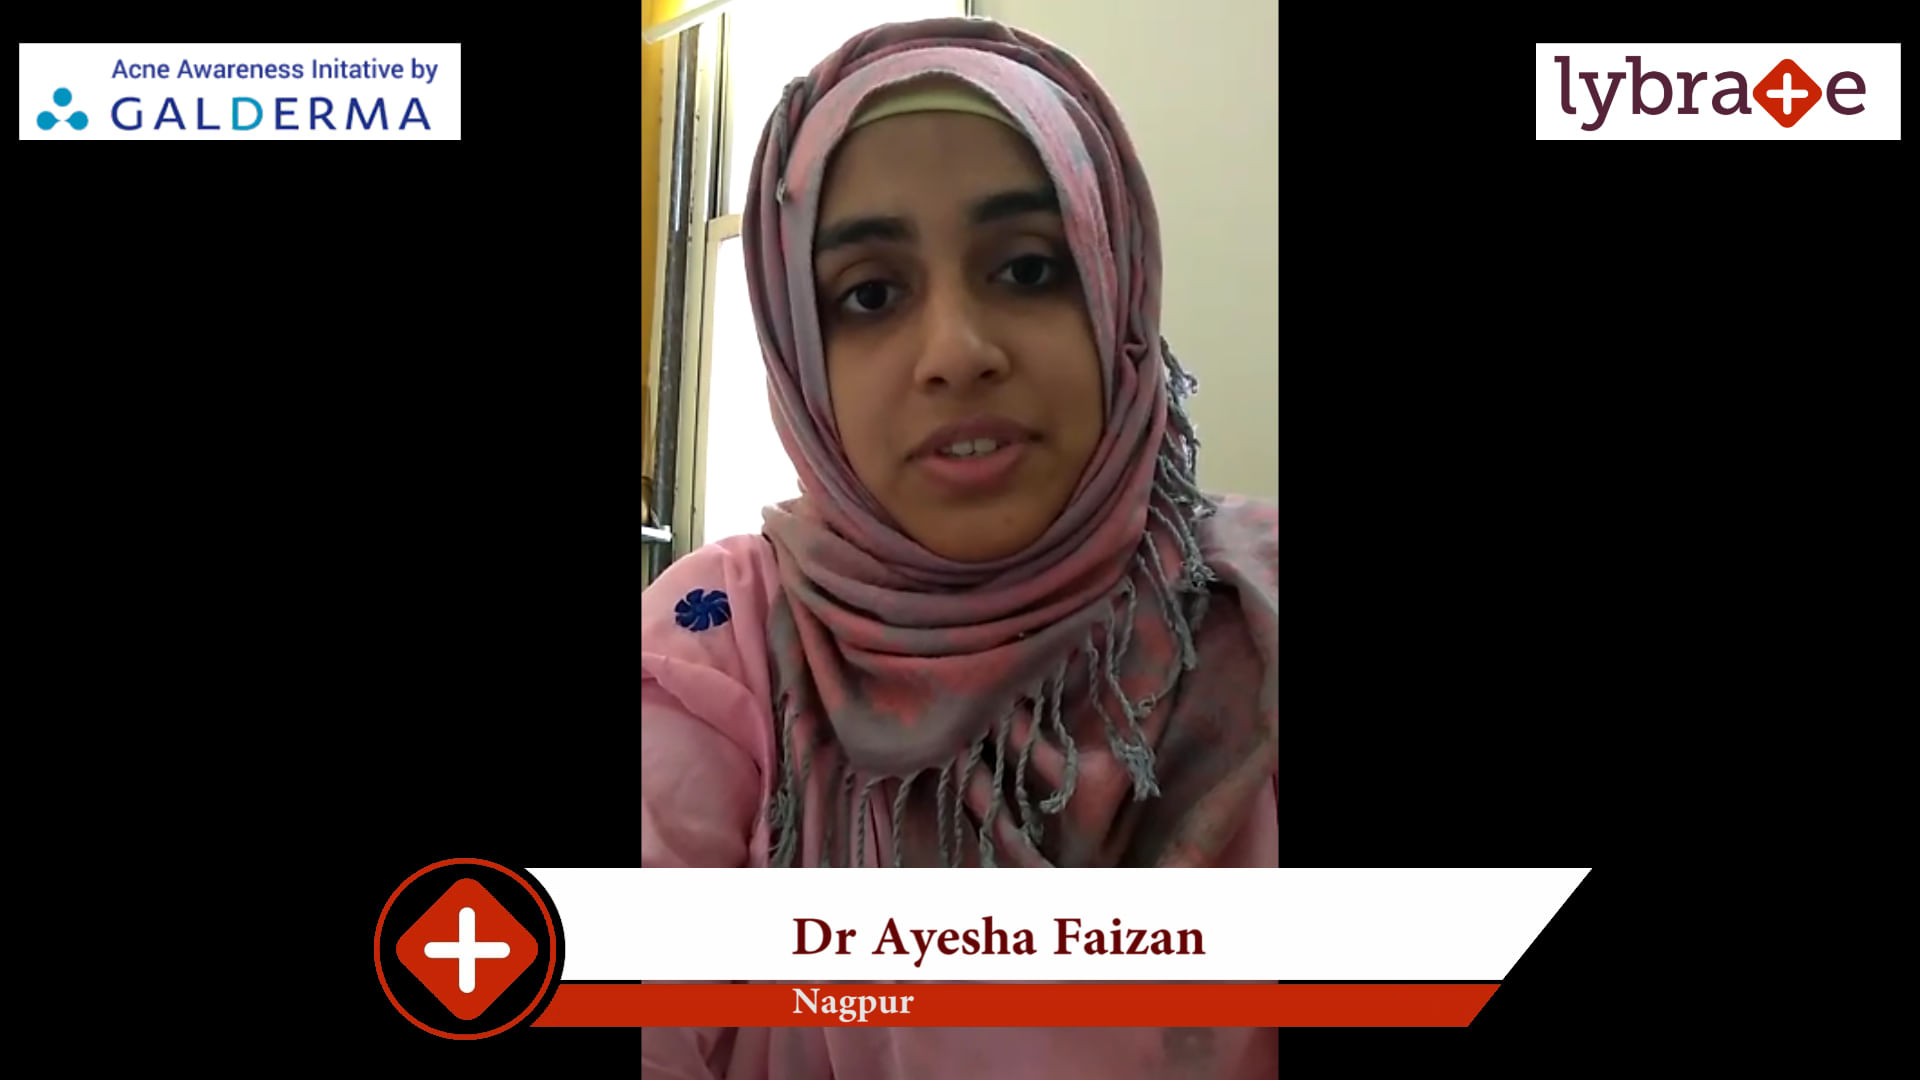 Lybrate | Dr. Ayesha Faizan speaks on IMPORTANCE OF TREATING ACNE EARLY